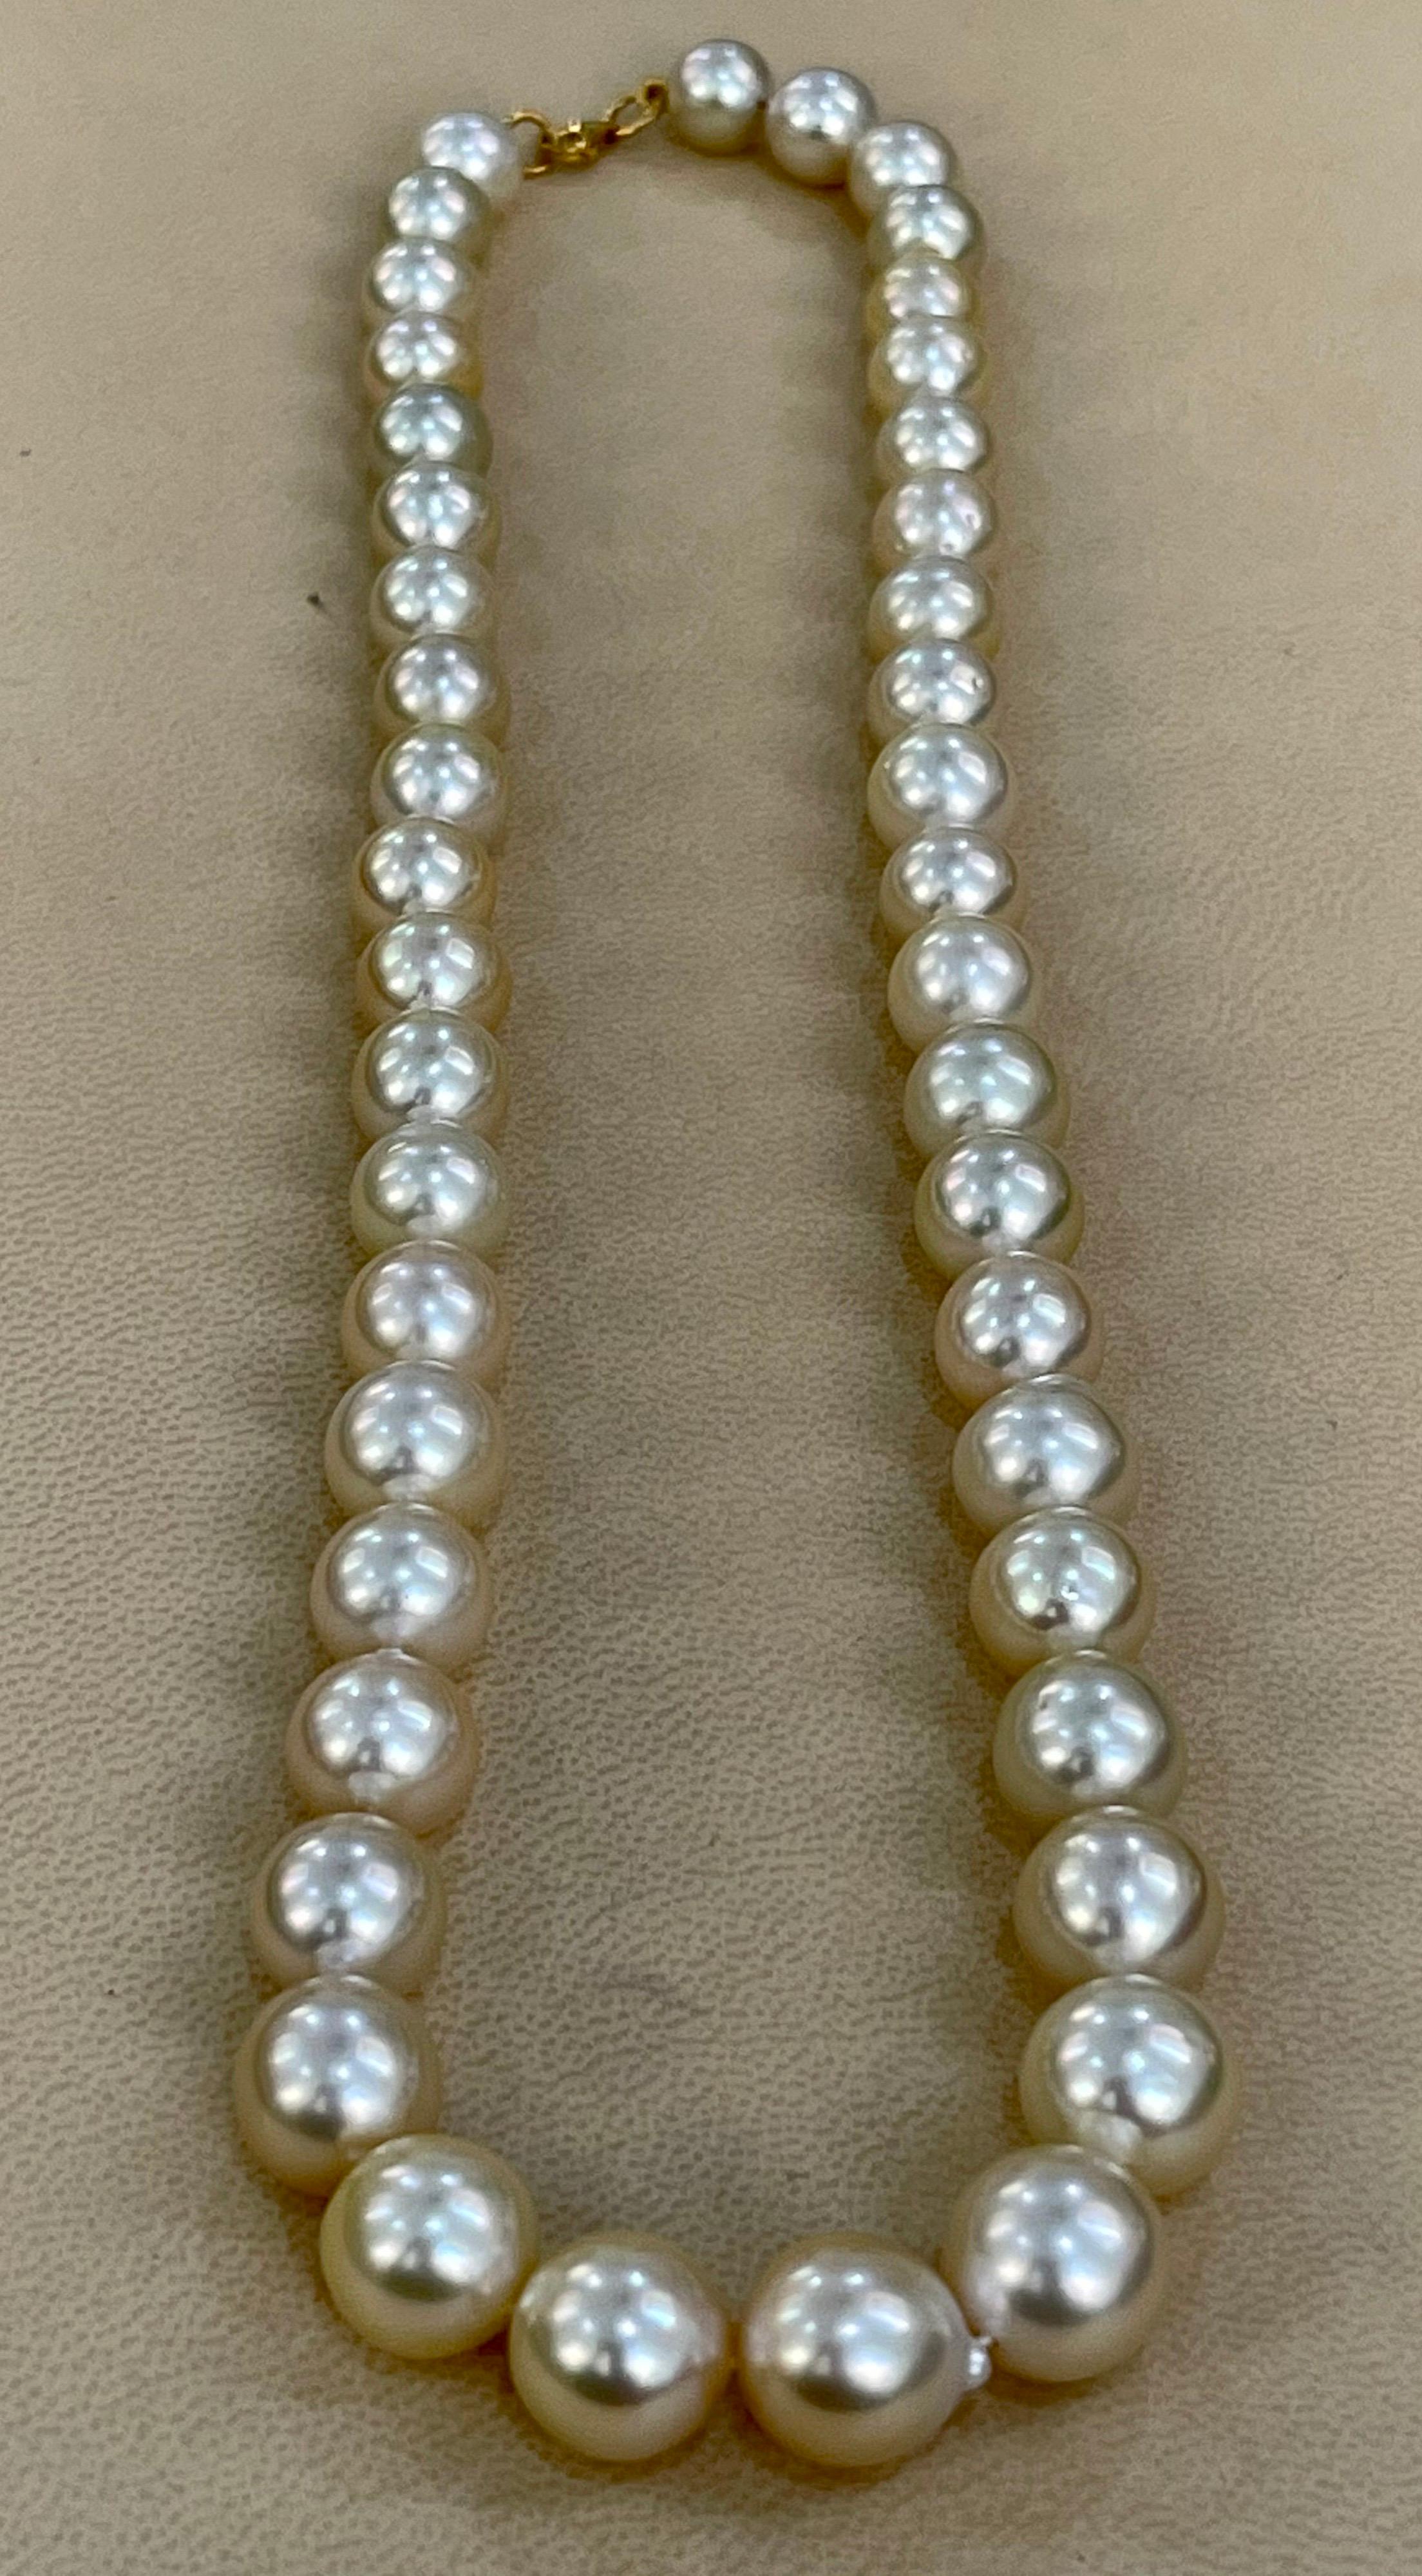 9-12 mm Cream color  South Sea Pearls  18  Inches Long Strand Necklace , Estate
Exclusive , Very fine  quality, very few blemishes on them
The necklace is composed of 43  Off White or Cream color south Sea Pearls and  14K yellow lobster clasp
Estate